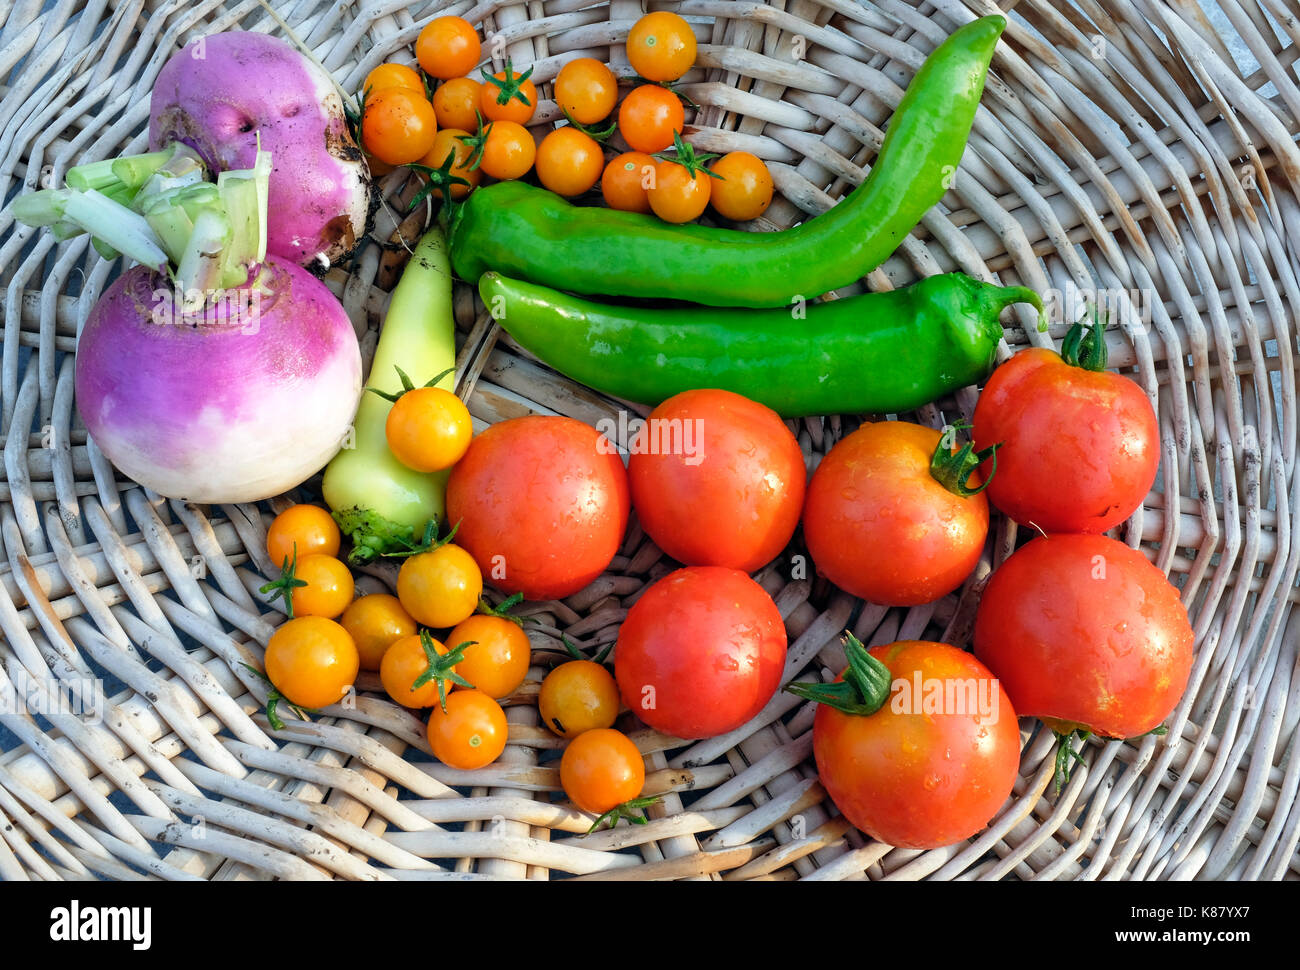 Turnips, sungold and early girl tomatoes, and green peppers fresh from an organic garden, in a basket. Stock Photo